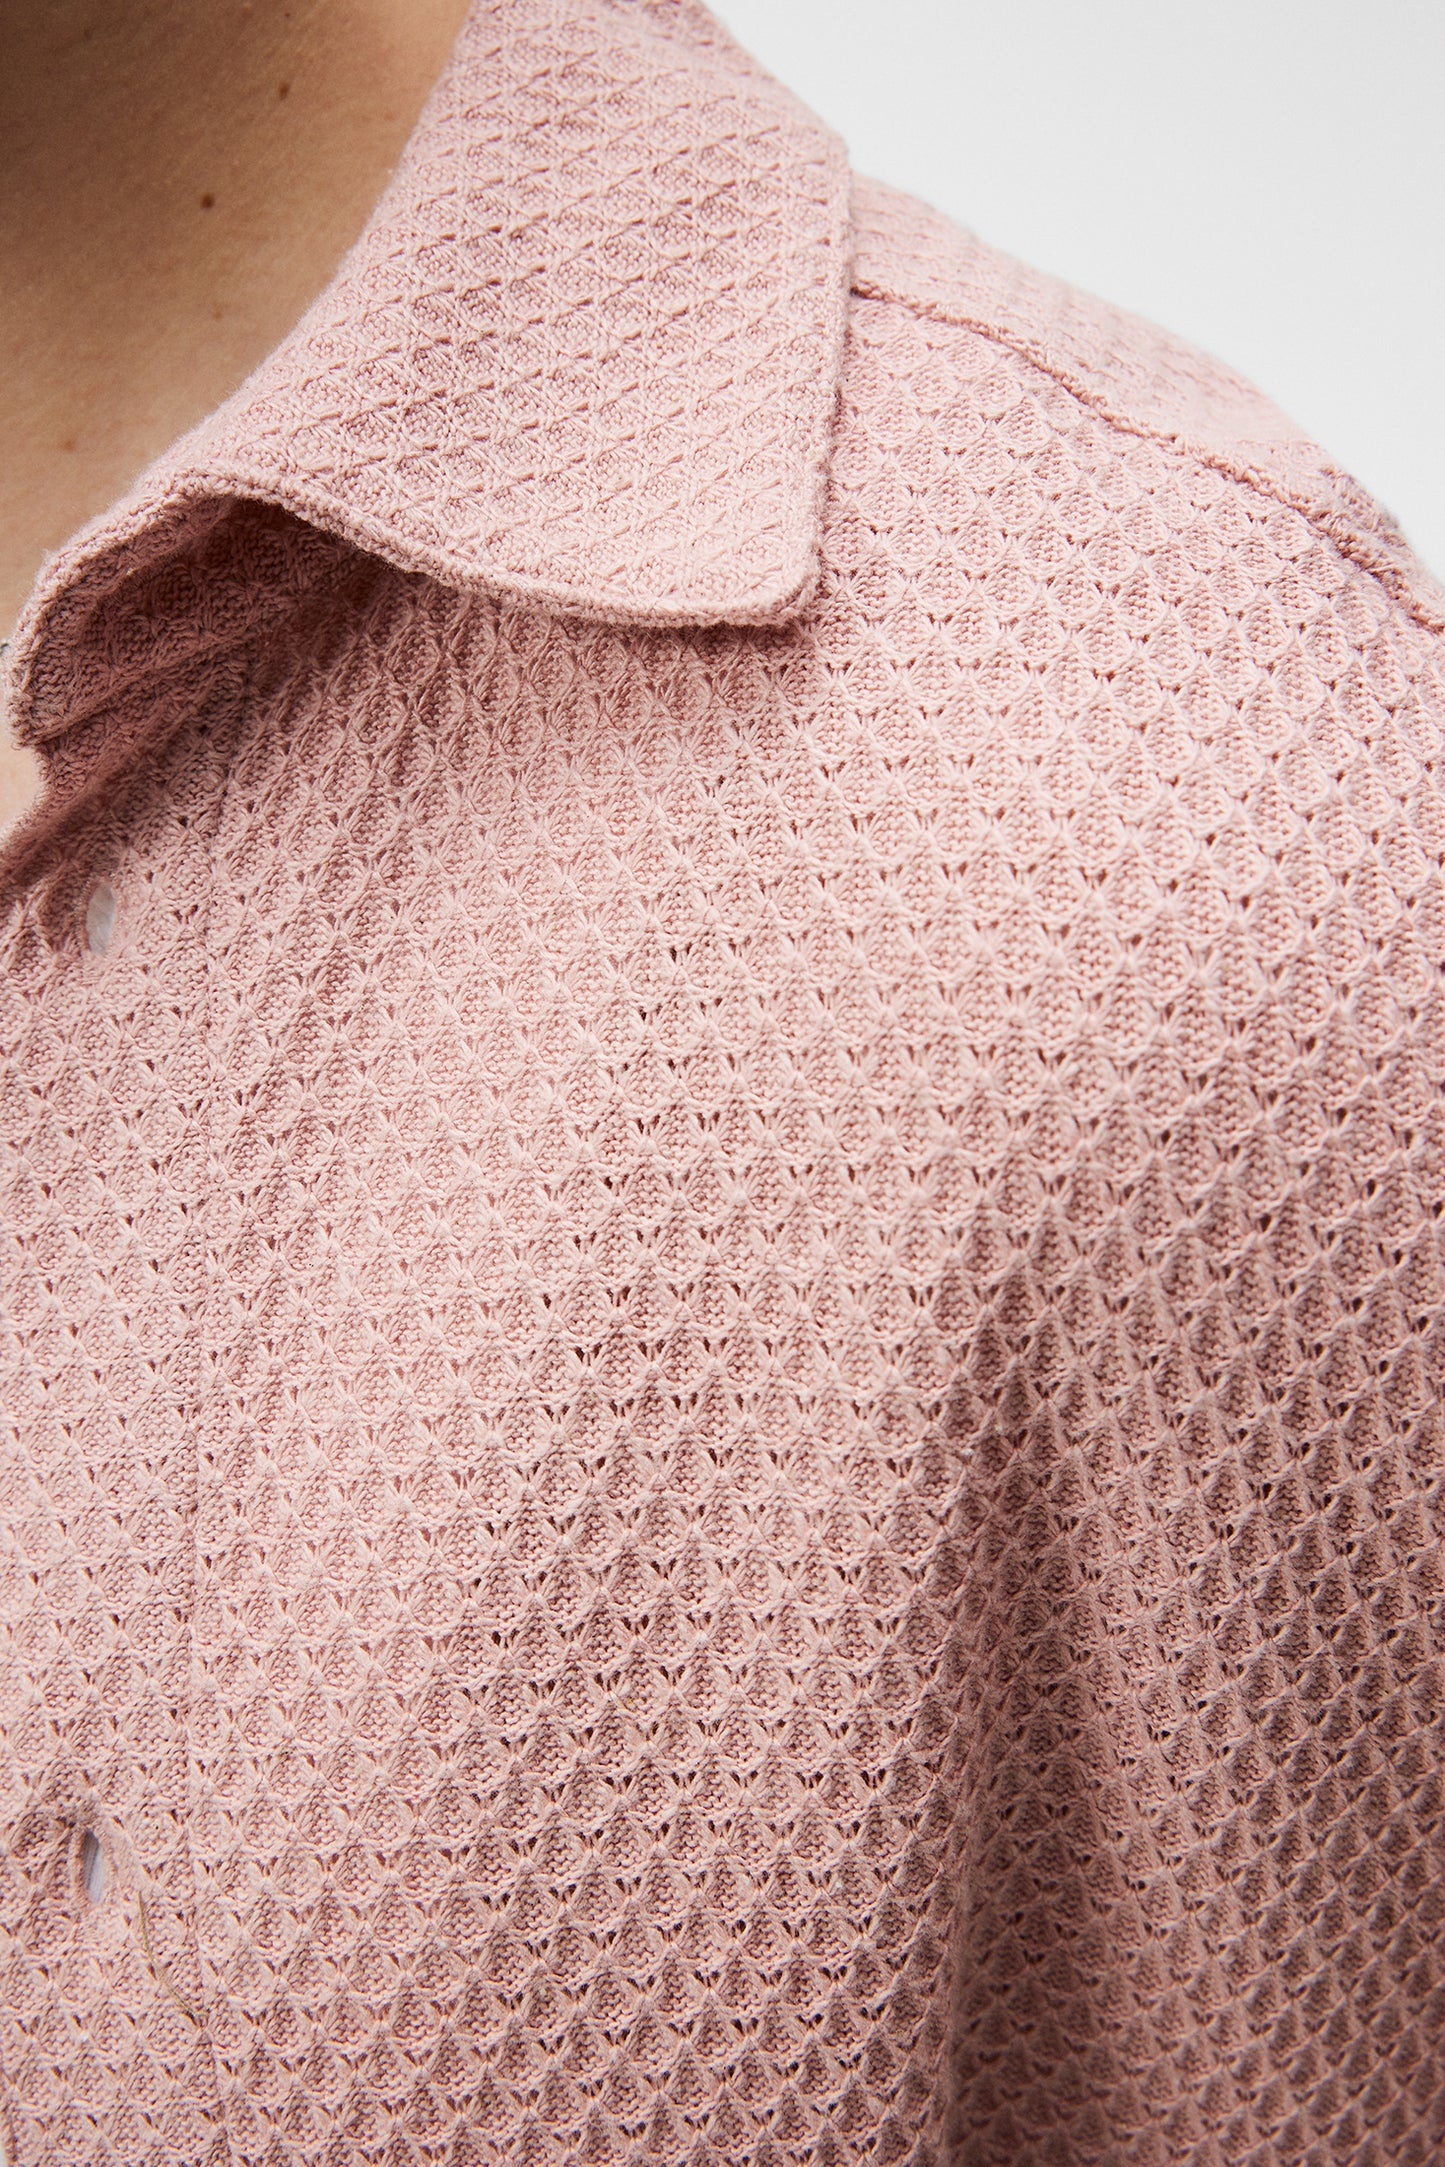 Torpa Airy Structure Shirt / Powder Pink